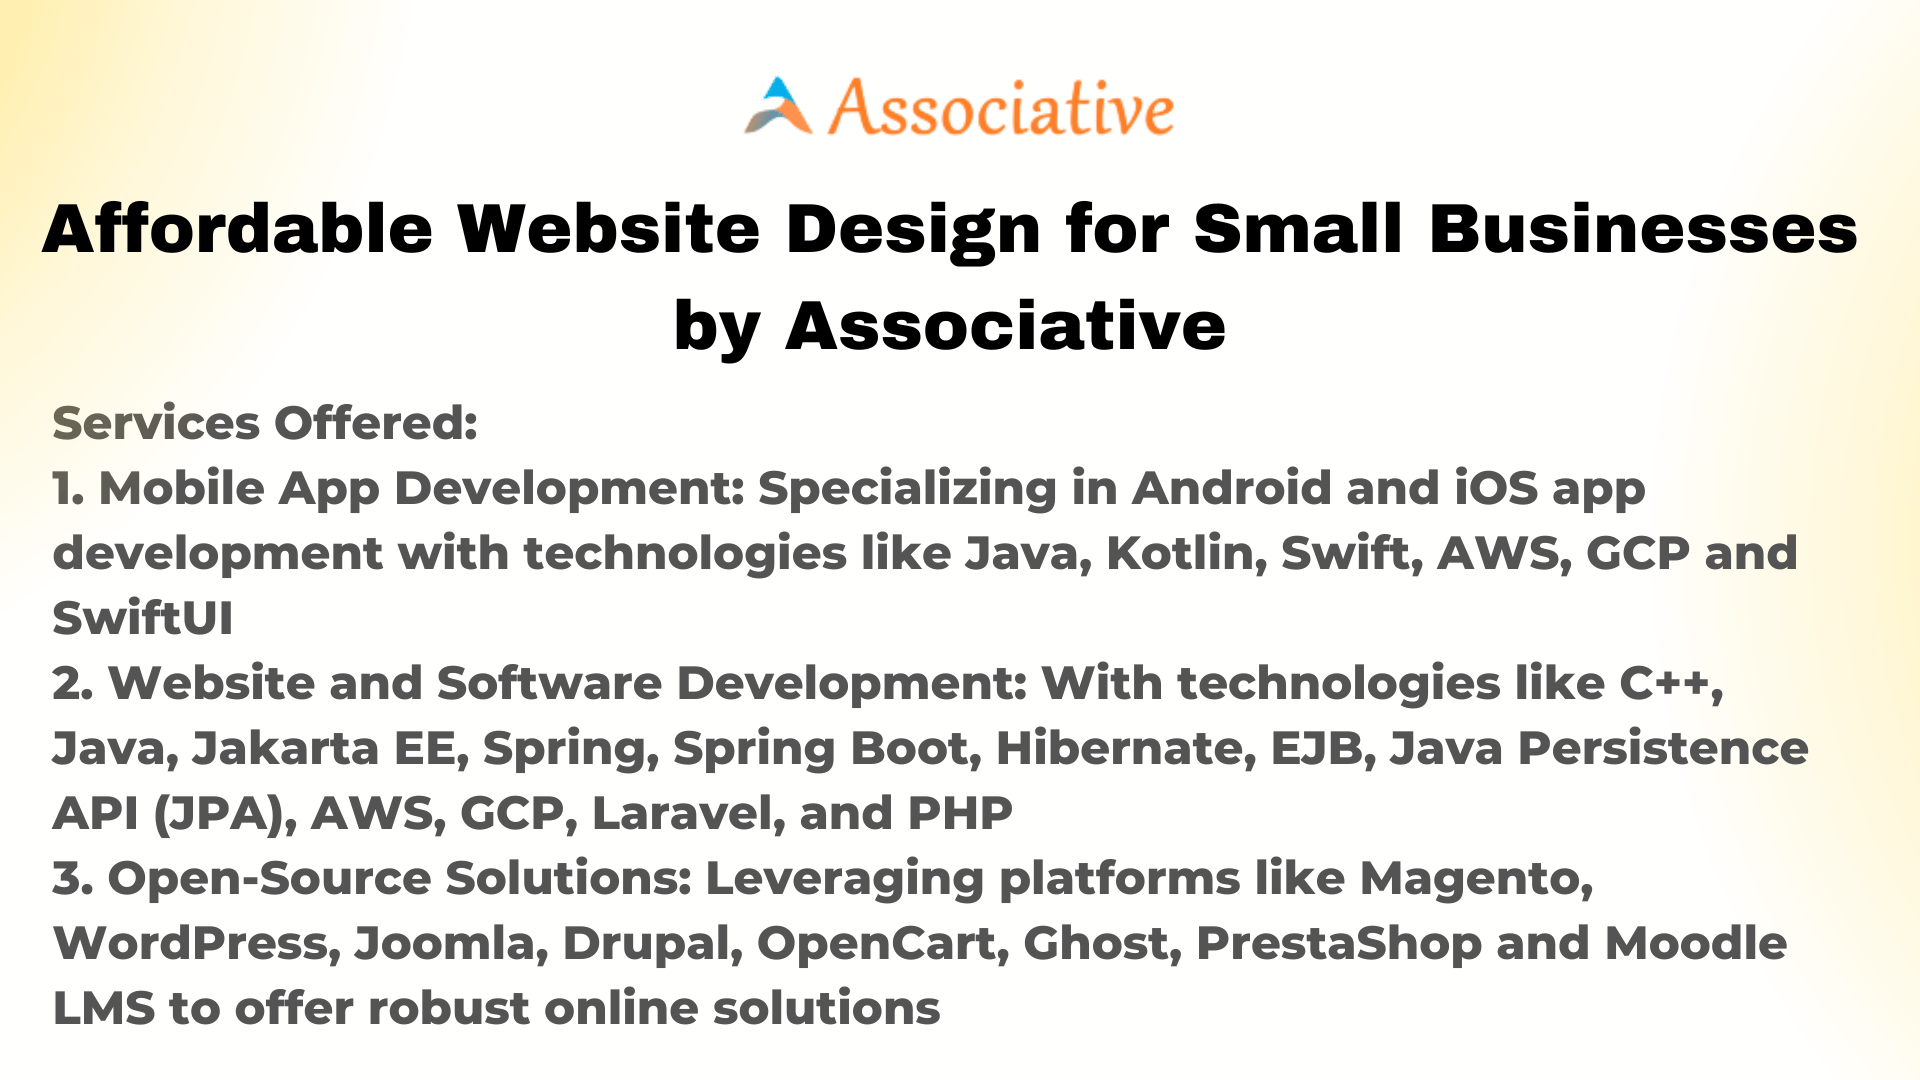 Affordable Website Design for Small Businesses by Associative